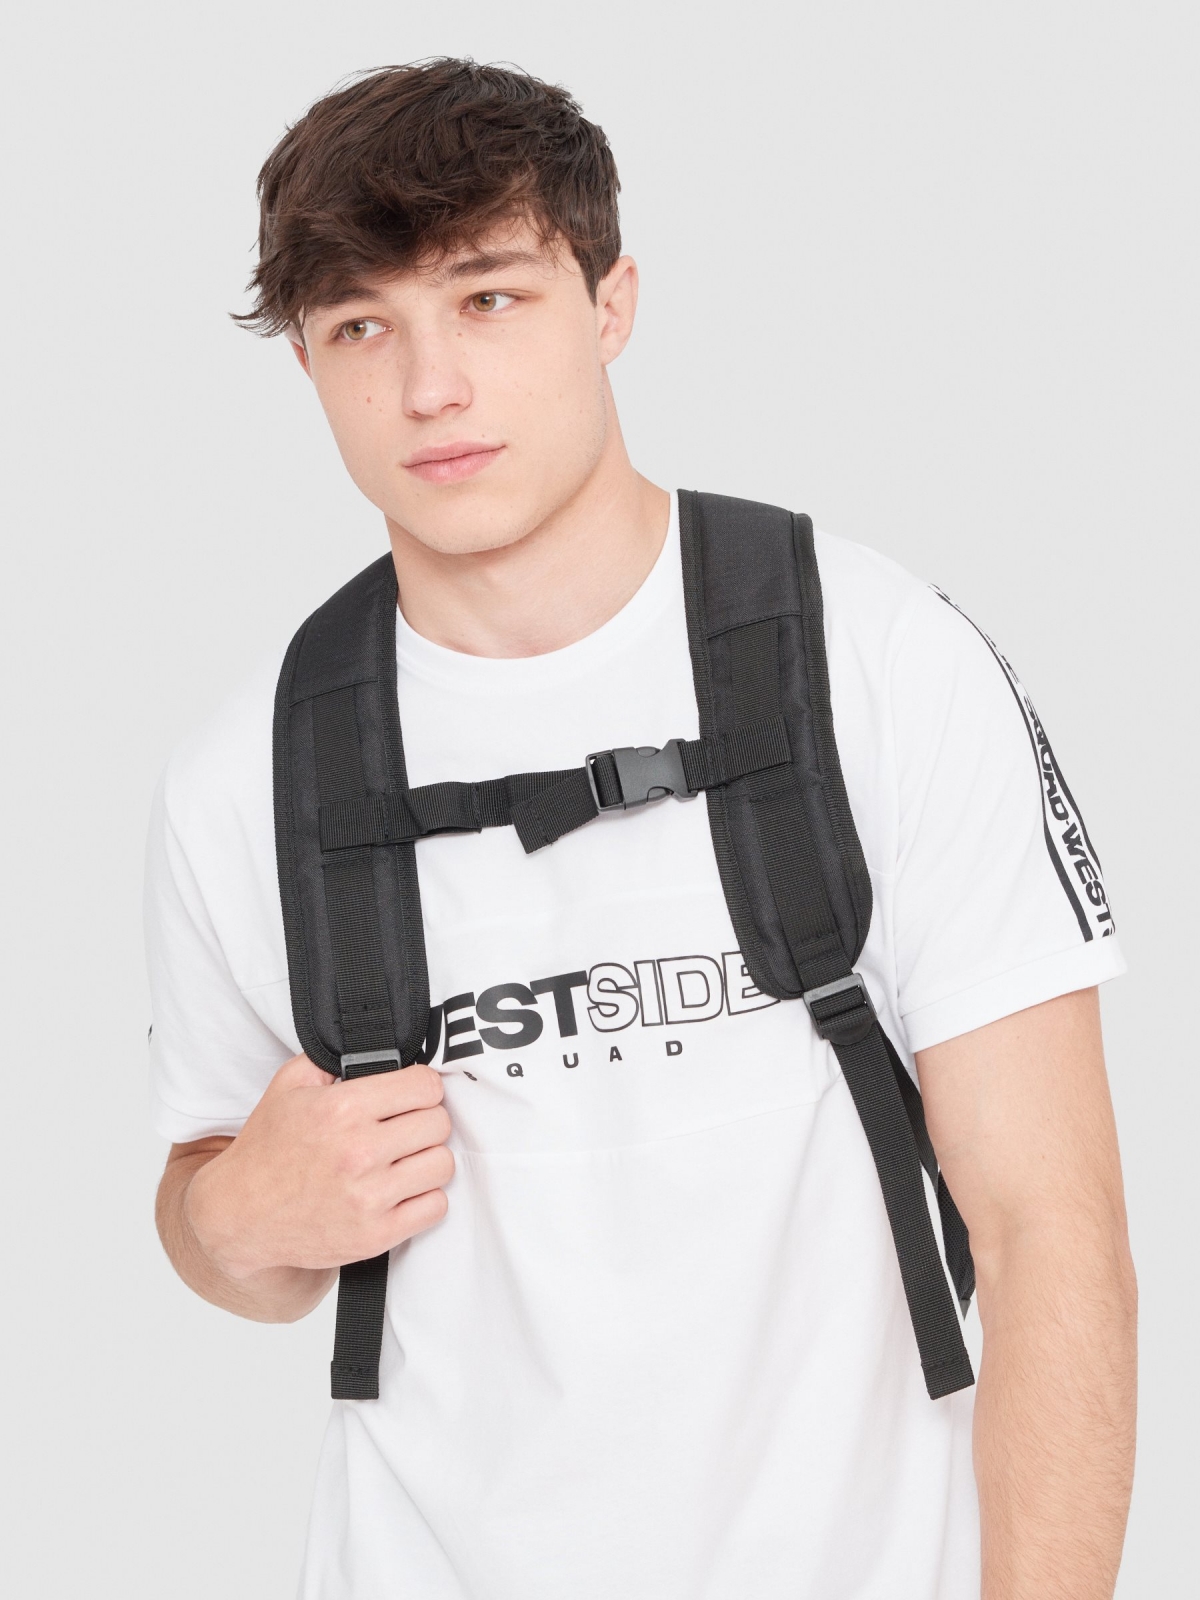 Polyester sports backpack black detail view